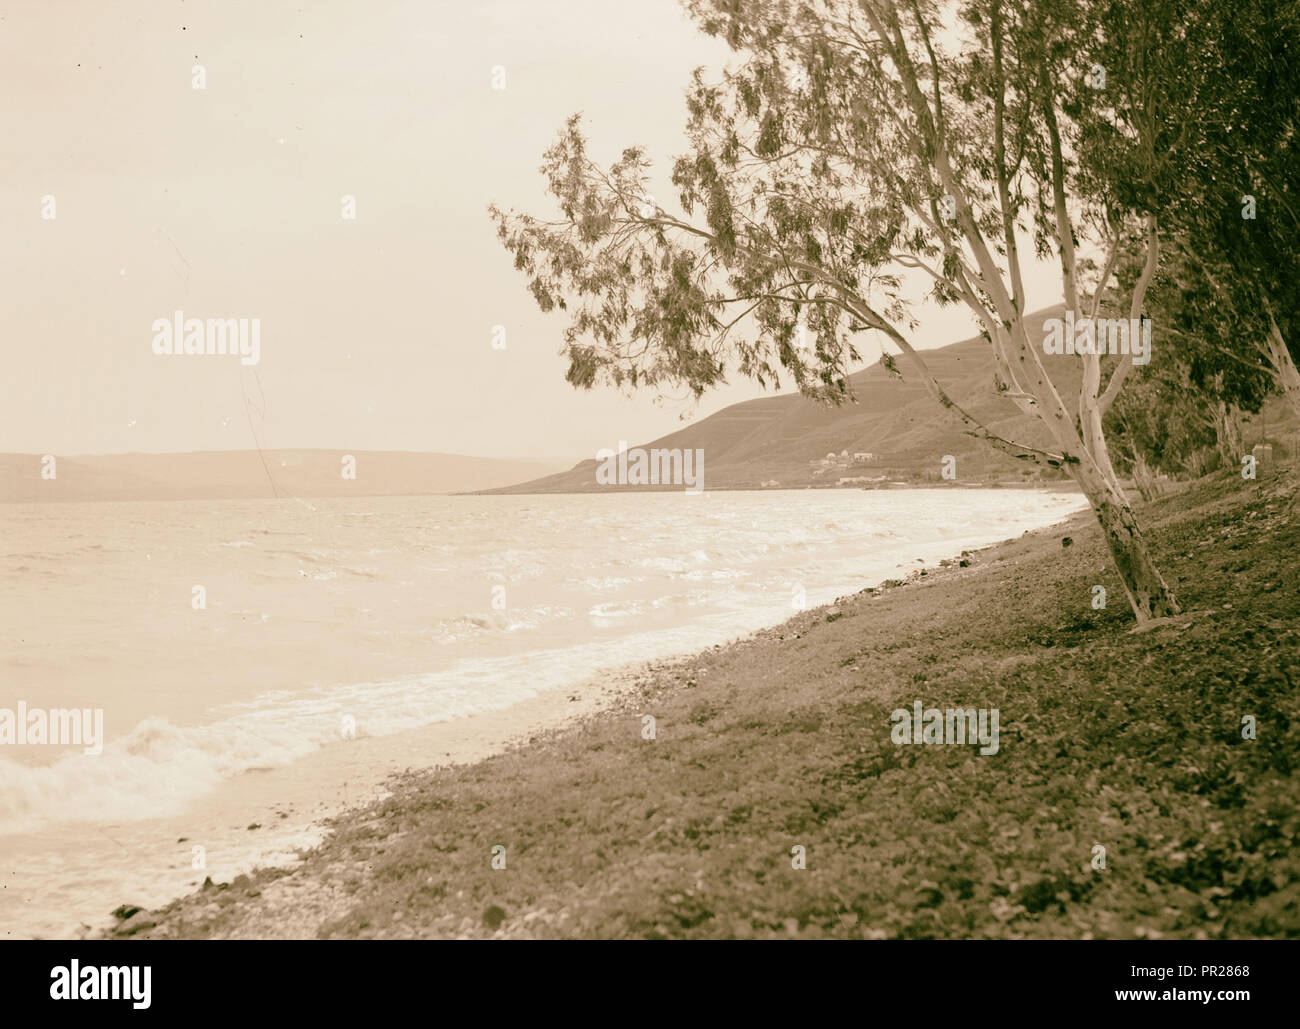 Sea of Galilee, looking S. showing baths in distance. 1940, Israel Stock Photo